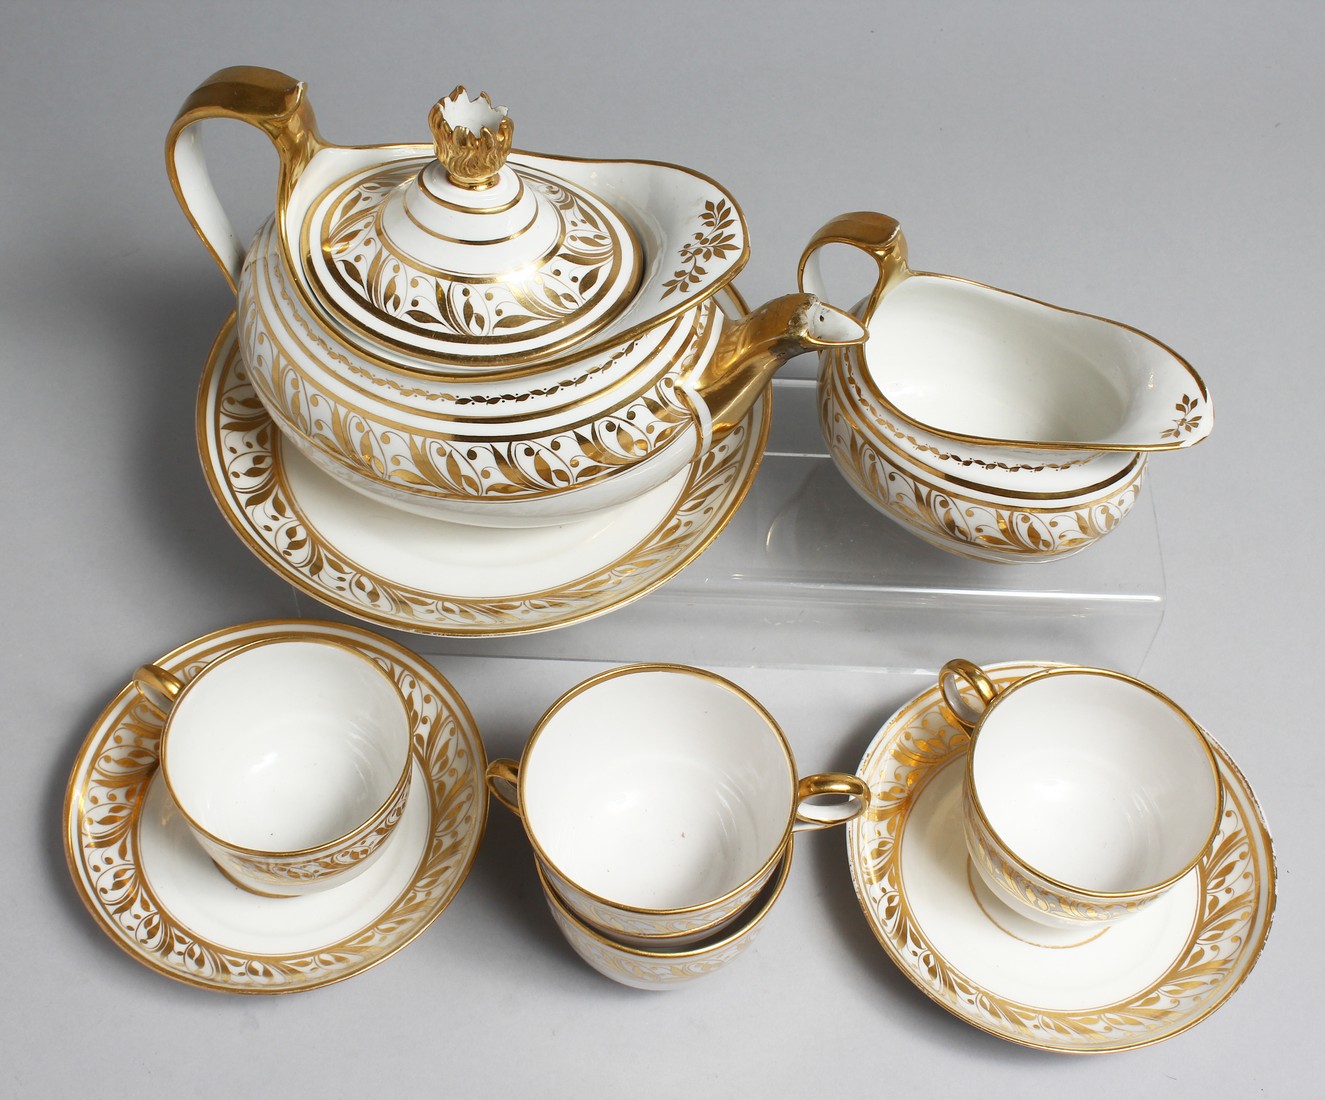 A FLIGHT BARR AND BARR WORCESTER REGENCY PART TEA SERVICE comprising a teapot and cover, cream - Image 2 of 6